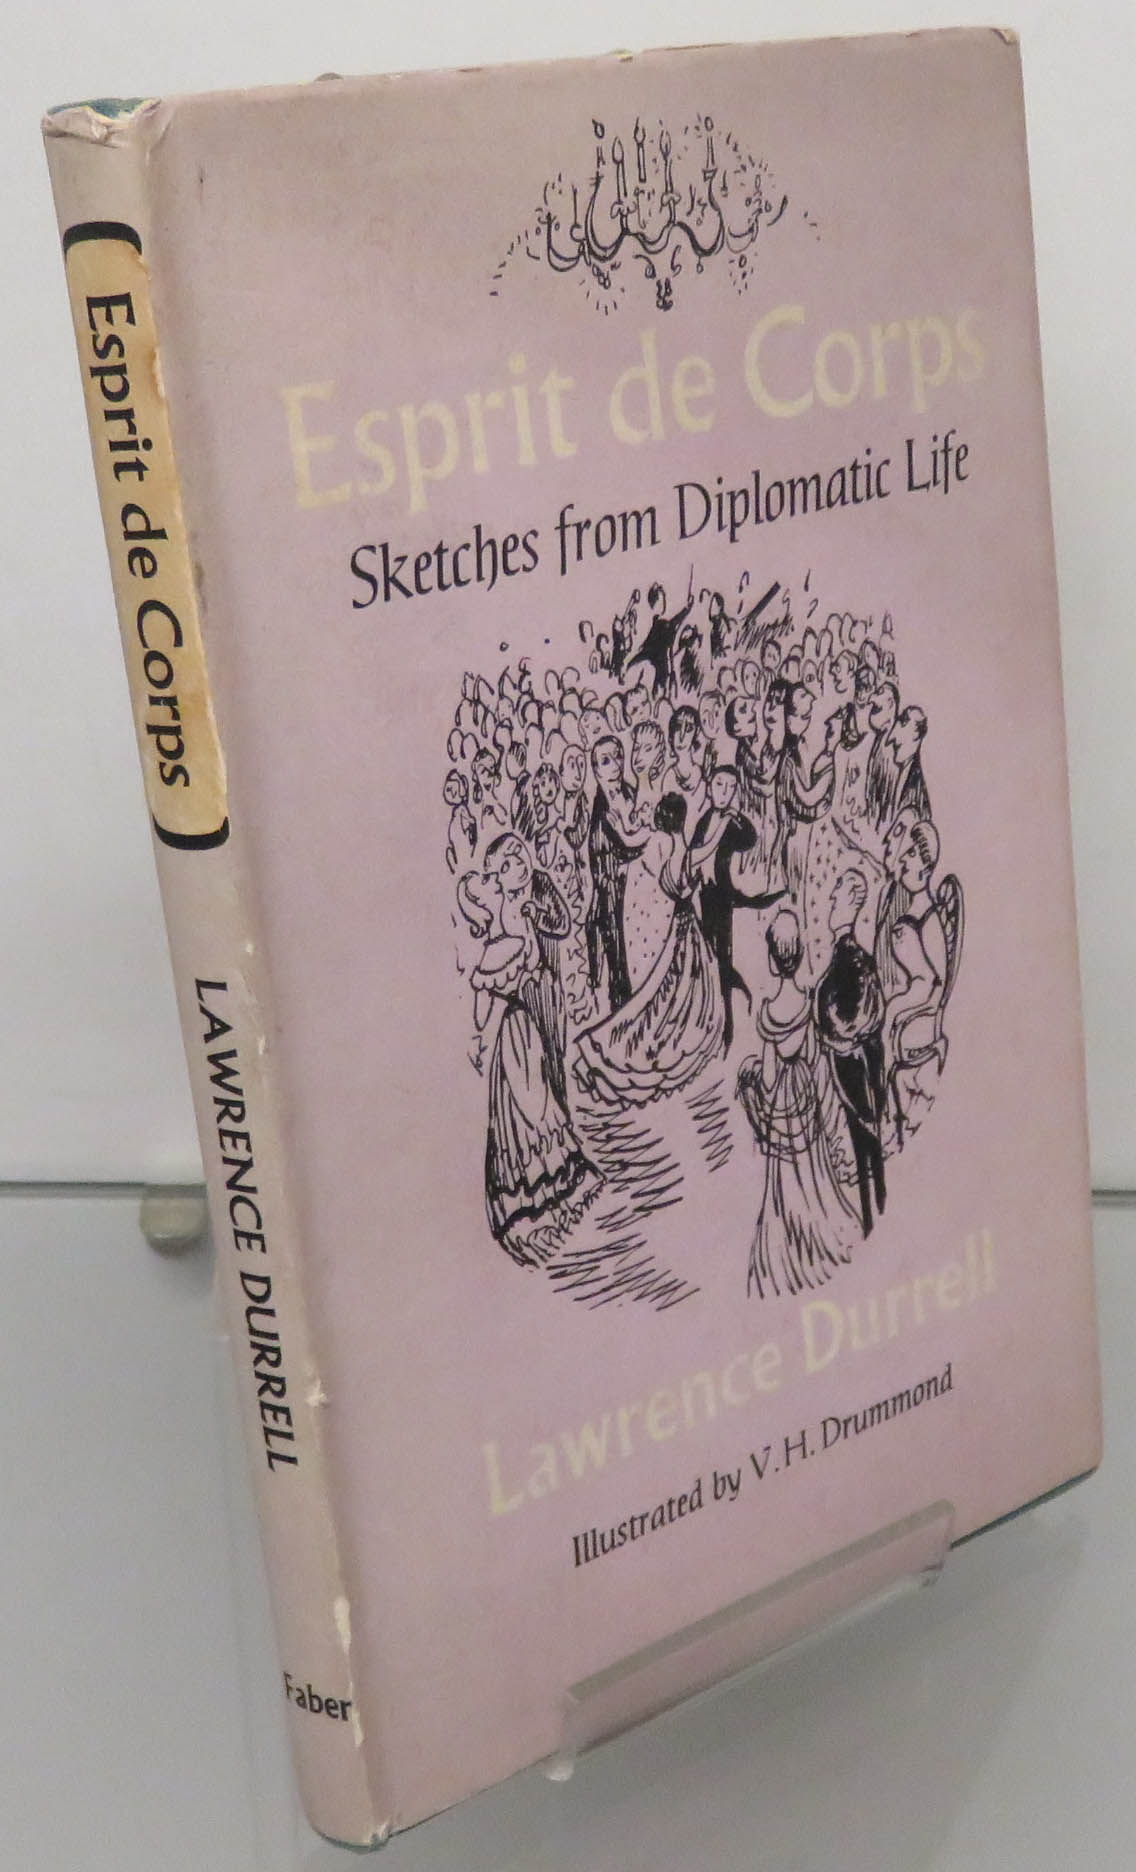 Esprit de Corps: Sketches from a Diplomatic Life